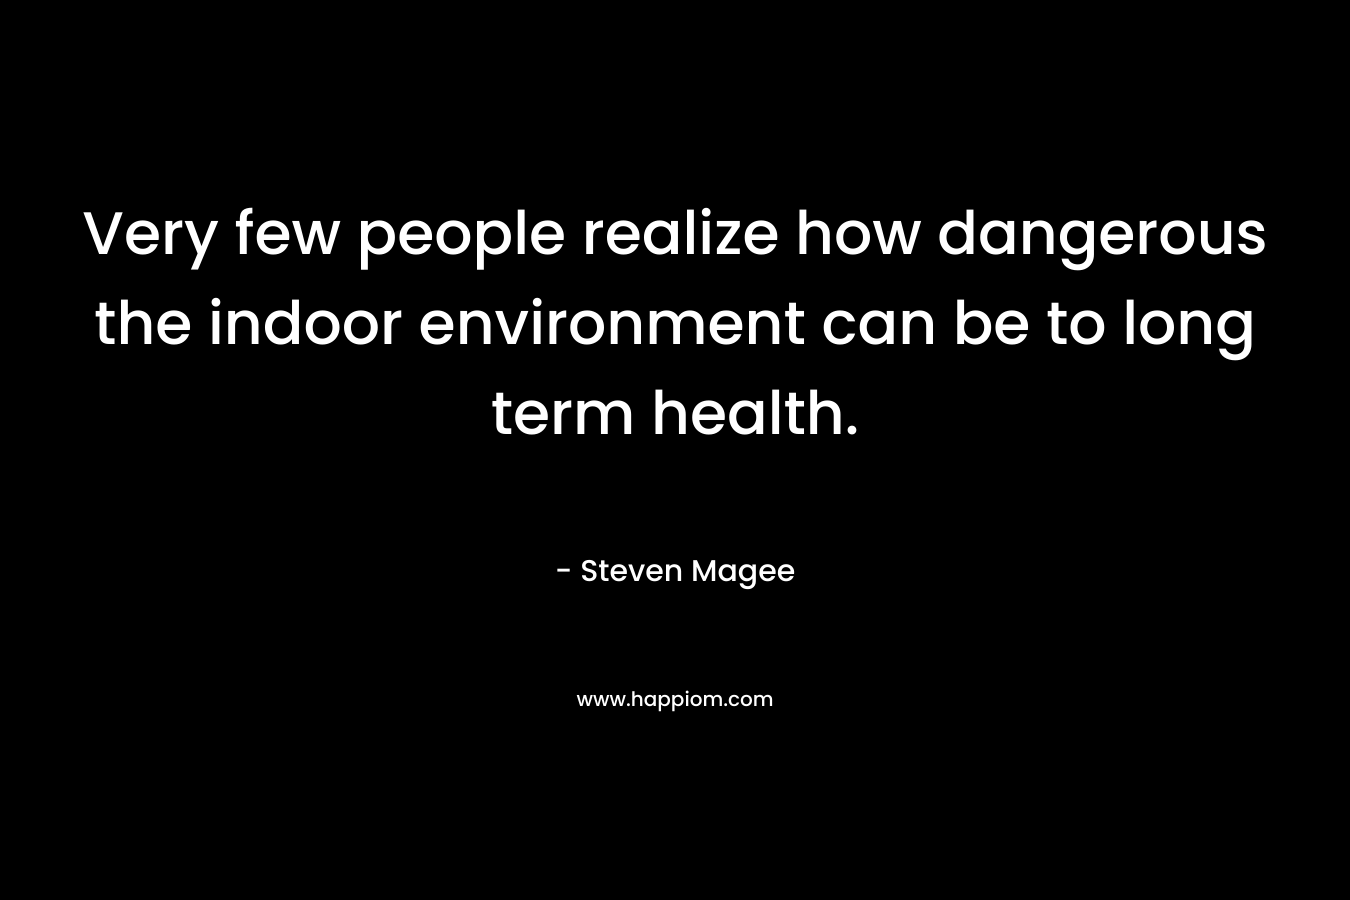 Very few people realize how dangerous the indoor environment can be to long term health.